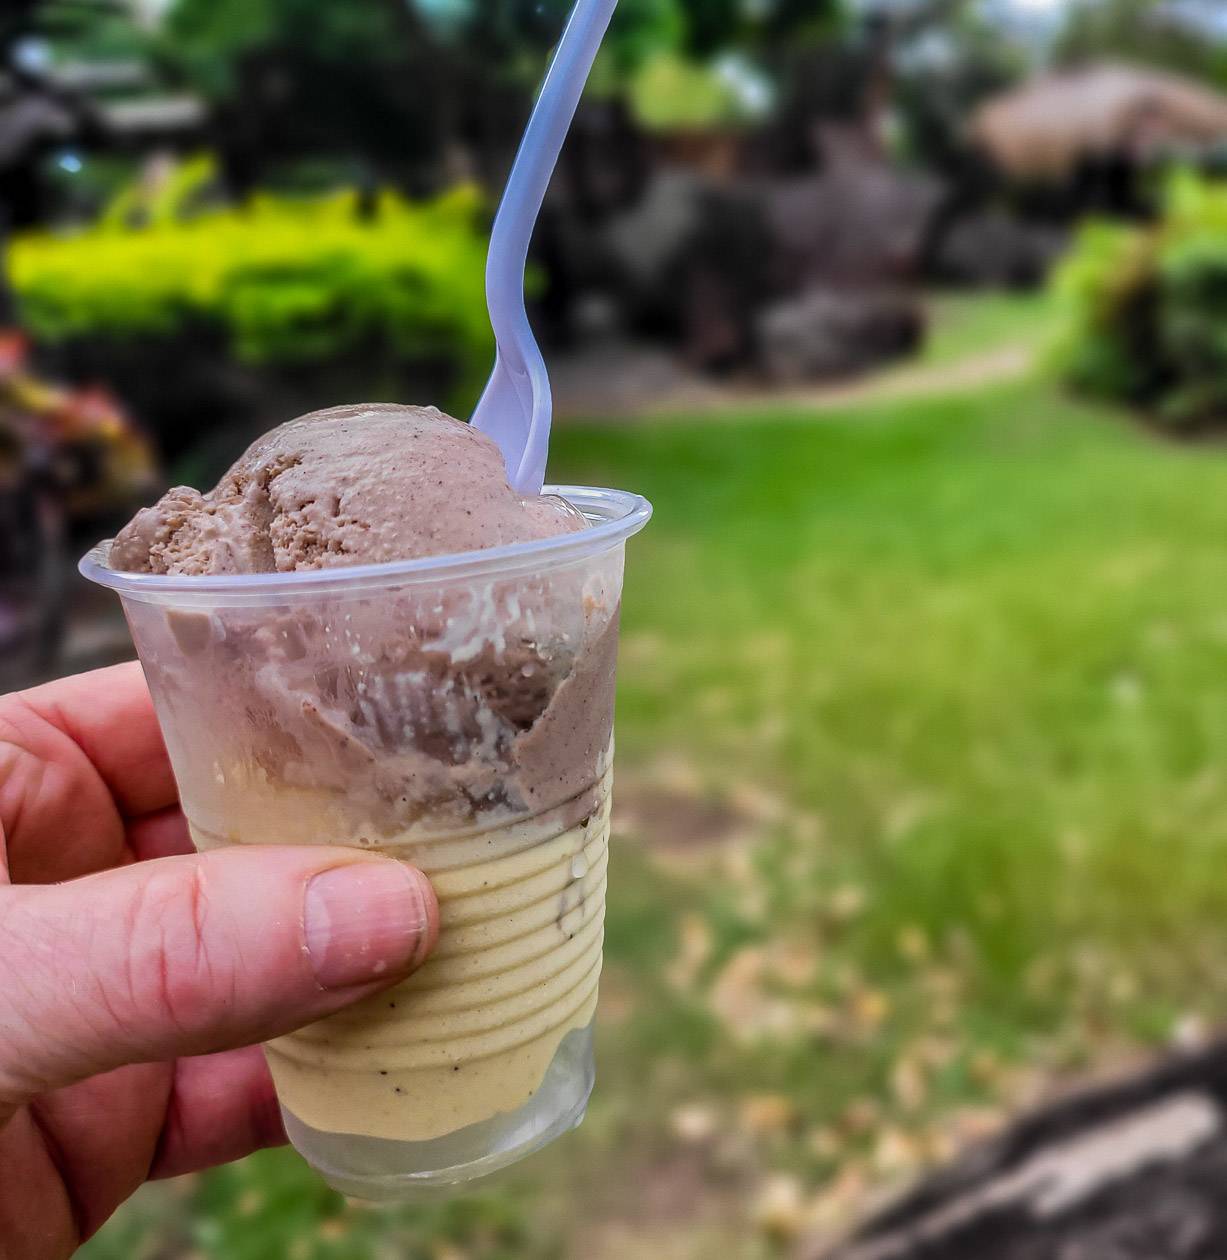 Bring US cash so you can buy ice cream at the end of the Gros Piton hike